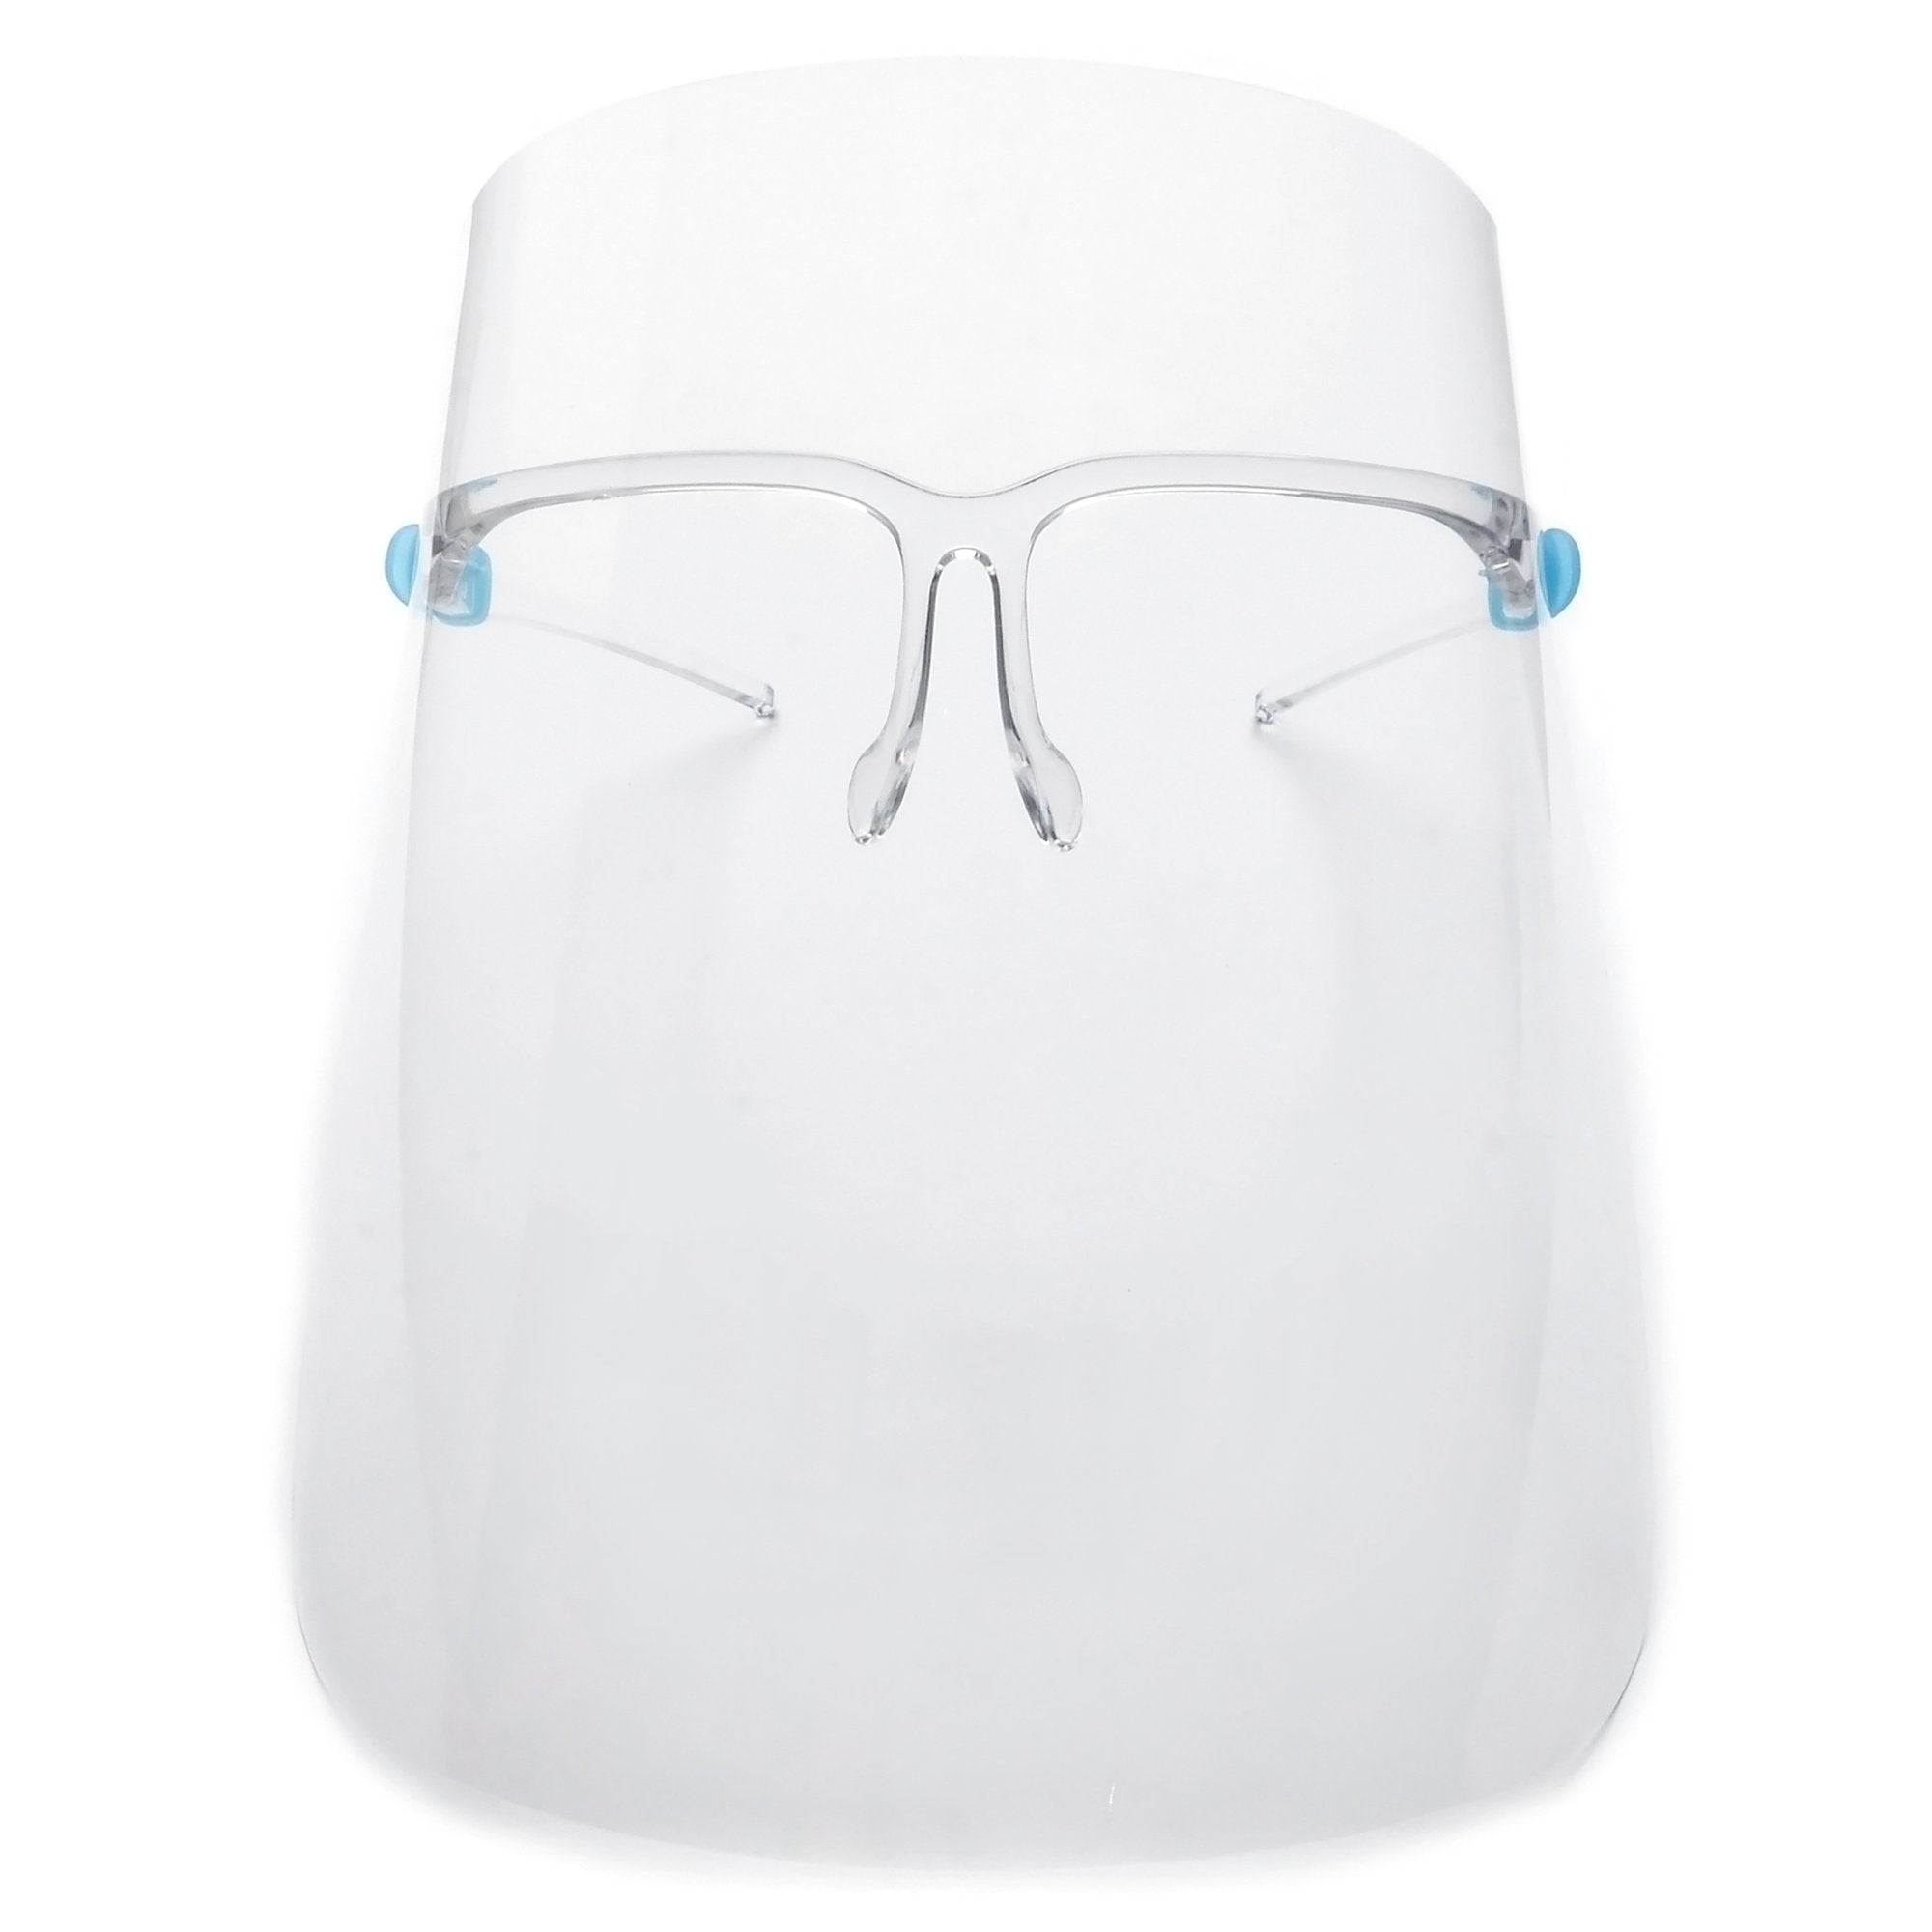 Anti-Fog Protective Face Shield w/ Glasses Frame - 10 Count - 2